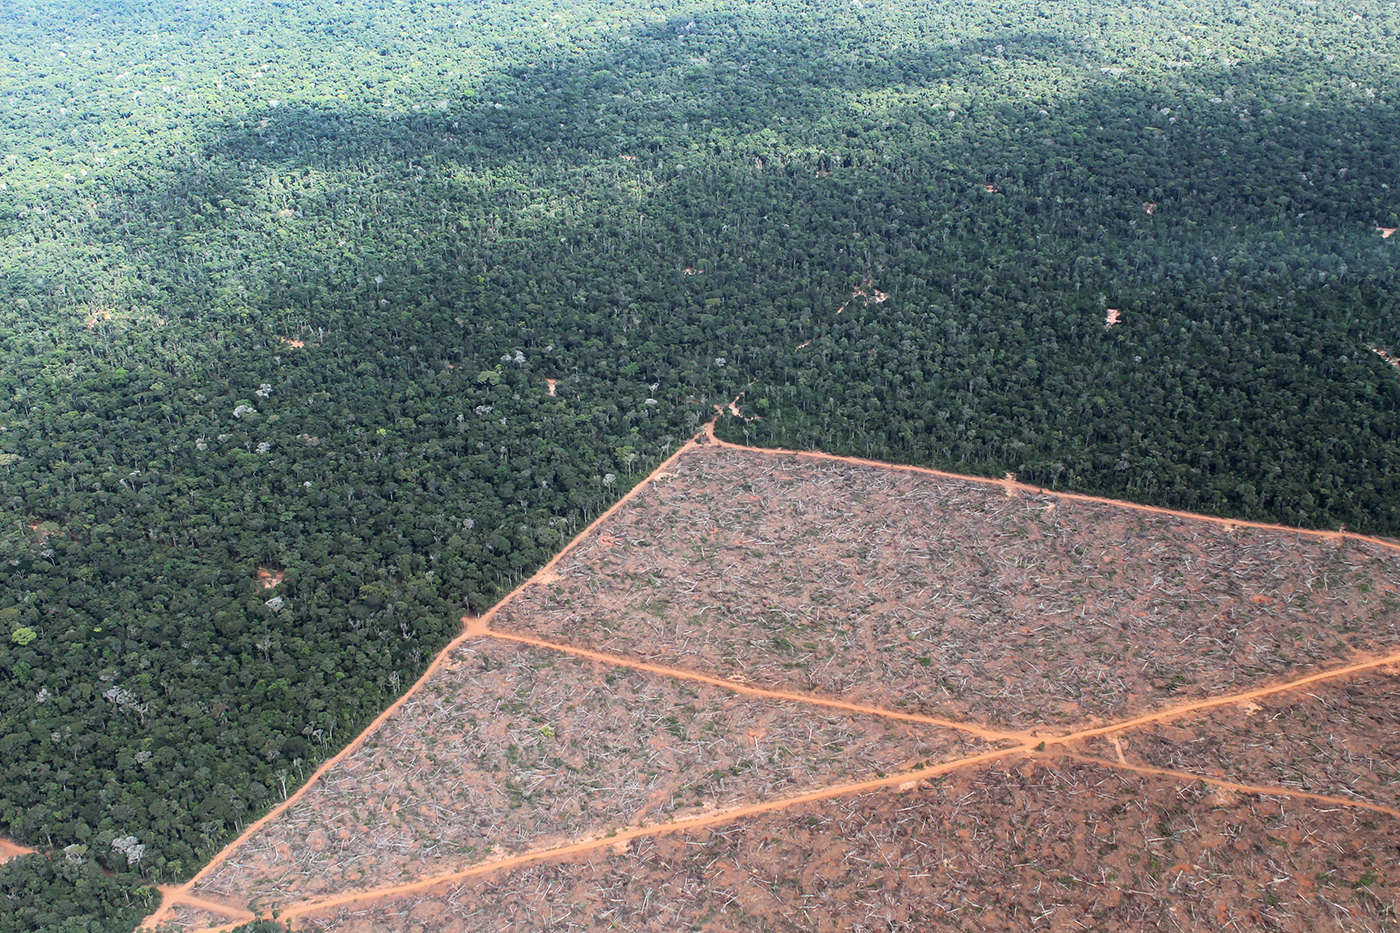 Deforestation outside the boundaries of the Xingu Indigenous Park. Photo: Traci Romine